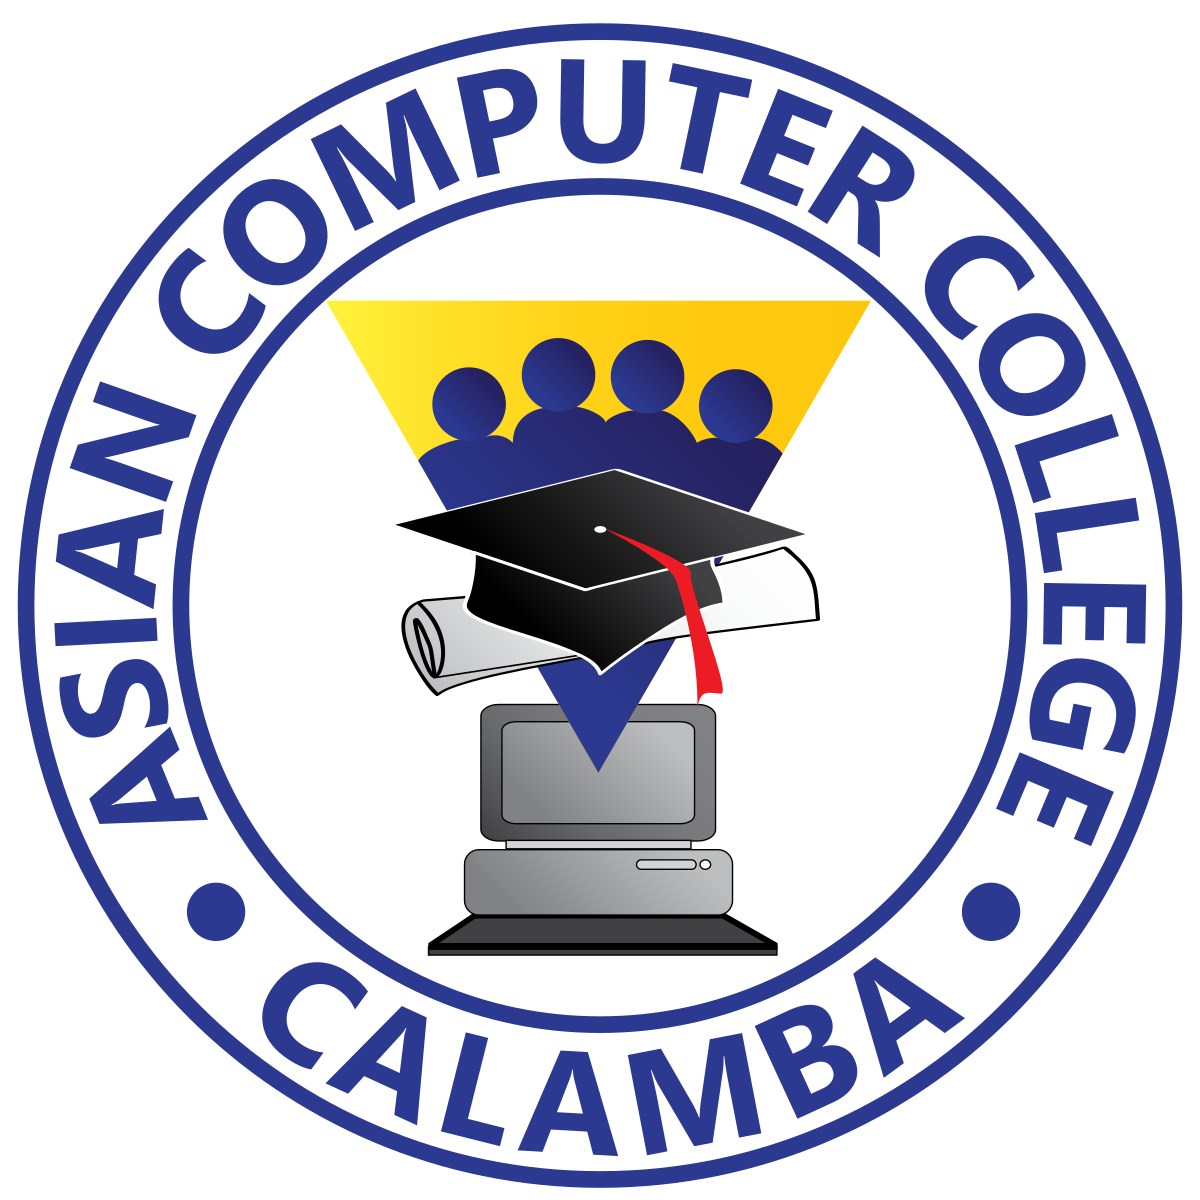 Asian college wikipedia . Website clipart first computer